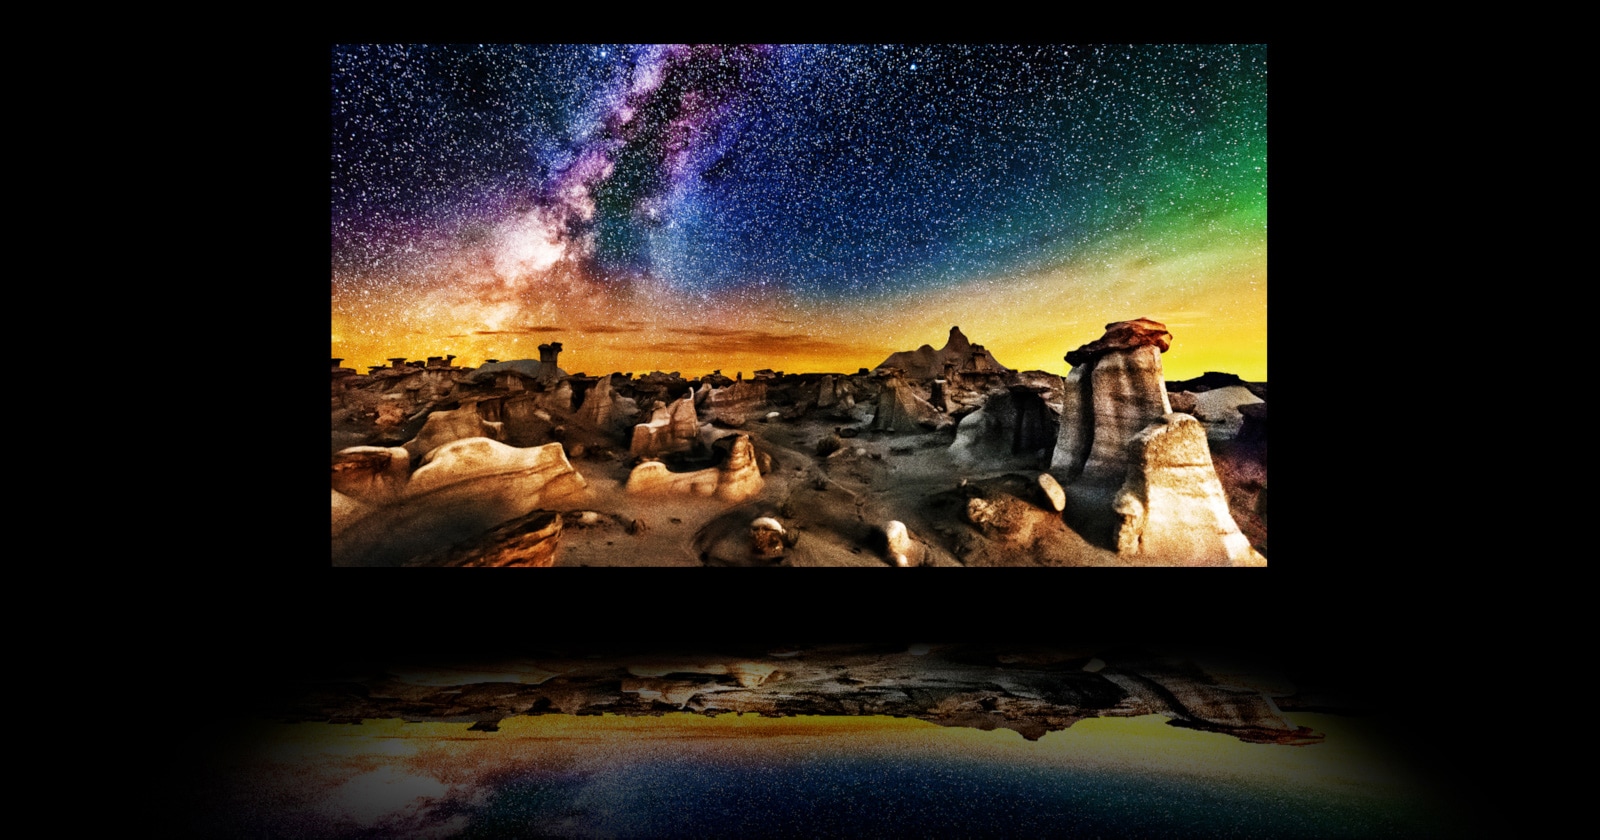 A video of a TV's layers with a starry nighttime landscape photograph on the main OLED display. The backlight disappears, and the polarizer, color filter, and OLED come together to produce an image so bright that it reflects below the TV like on water.